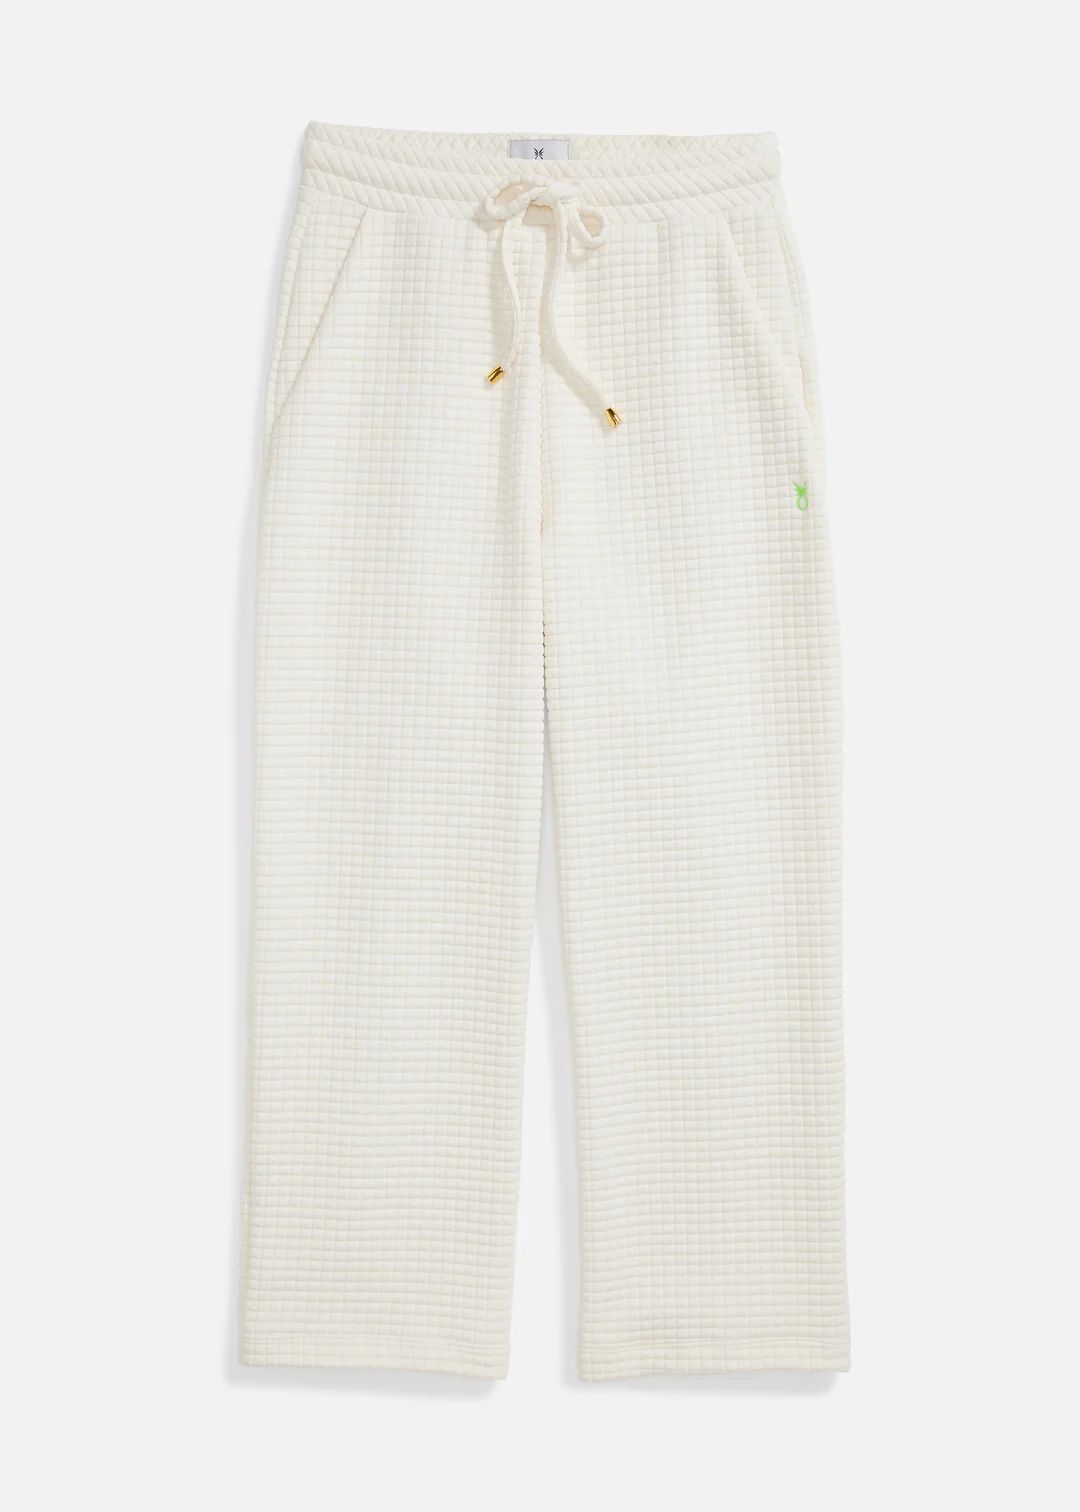 Palisades Pants in Waffle (Cream) | Dudley Stephens